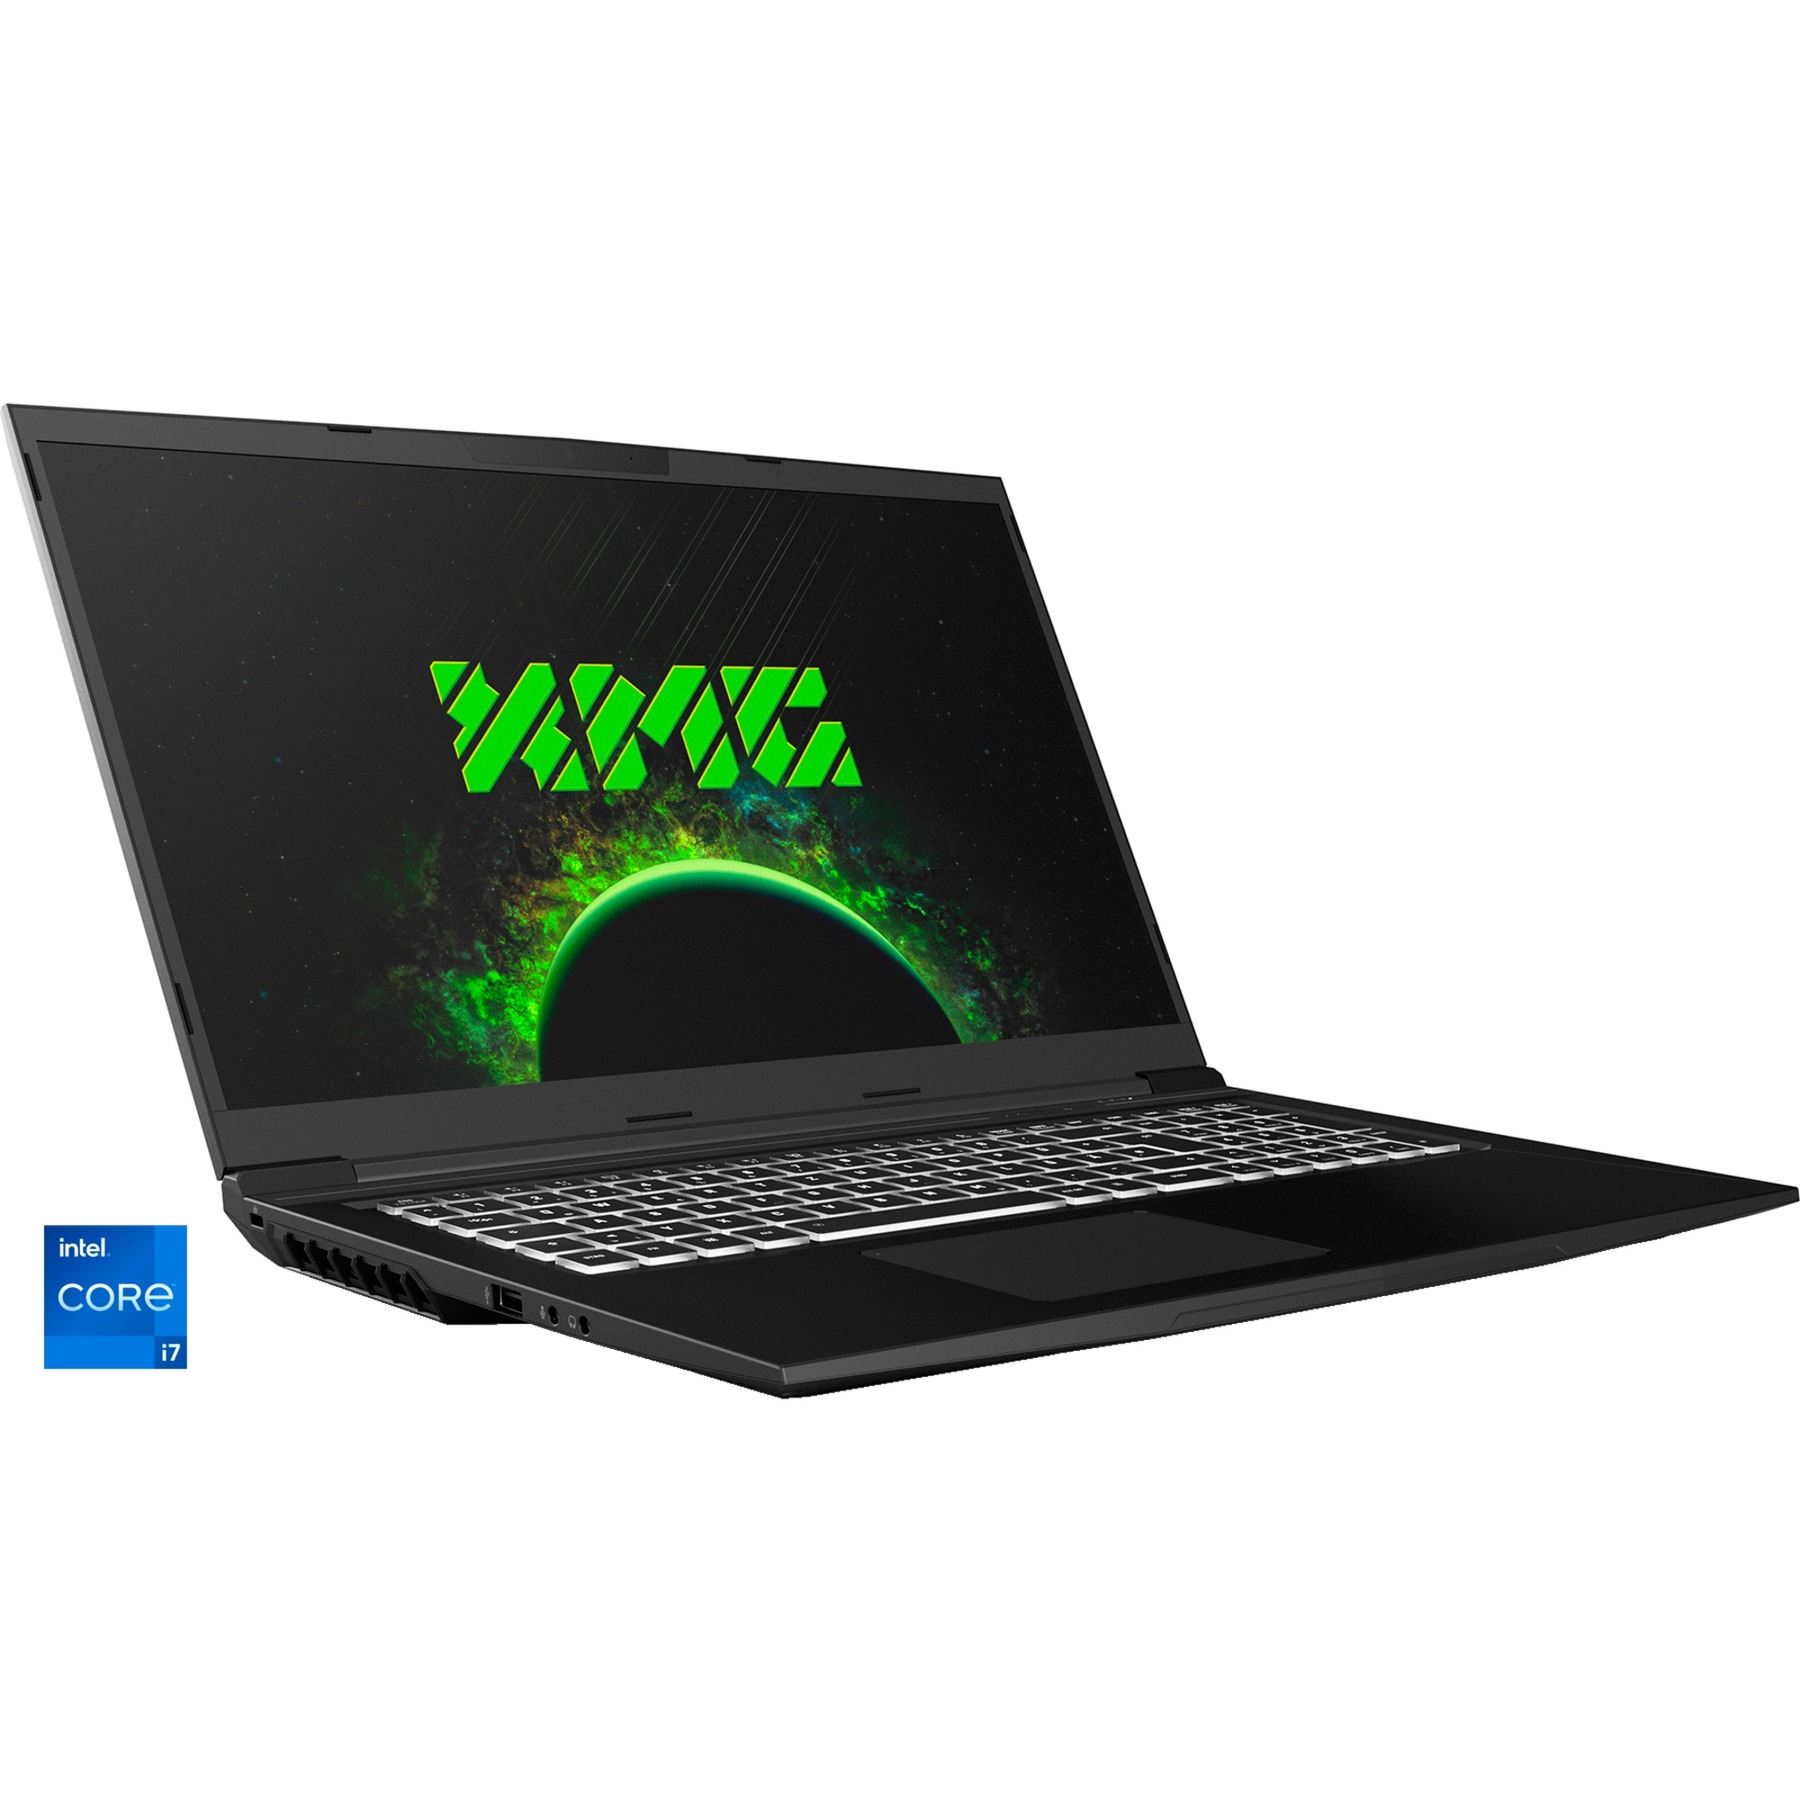 CORE 17 (10505860), Gaming-Notebook